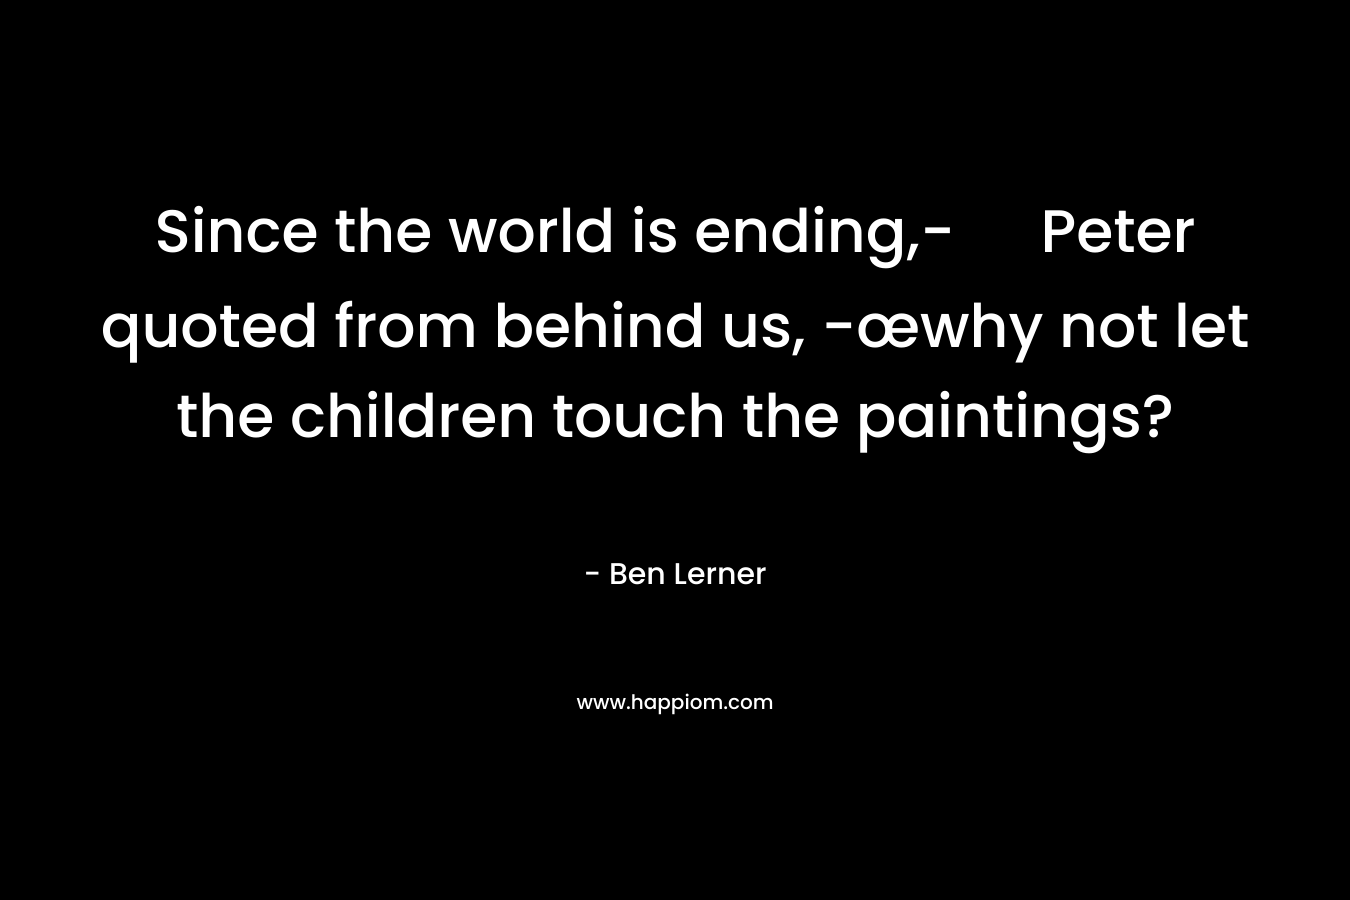 Since the world is ending,- Peter quoted from behind us, -œwhy not let the children touch the paintings?